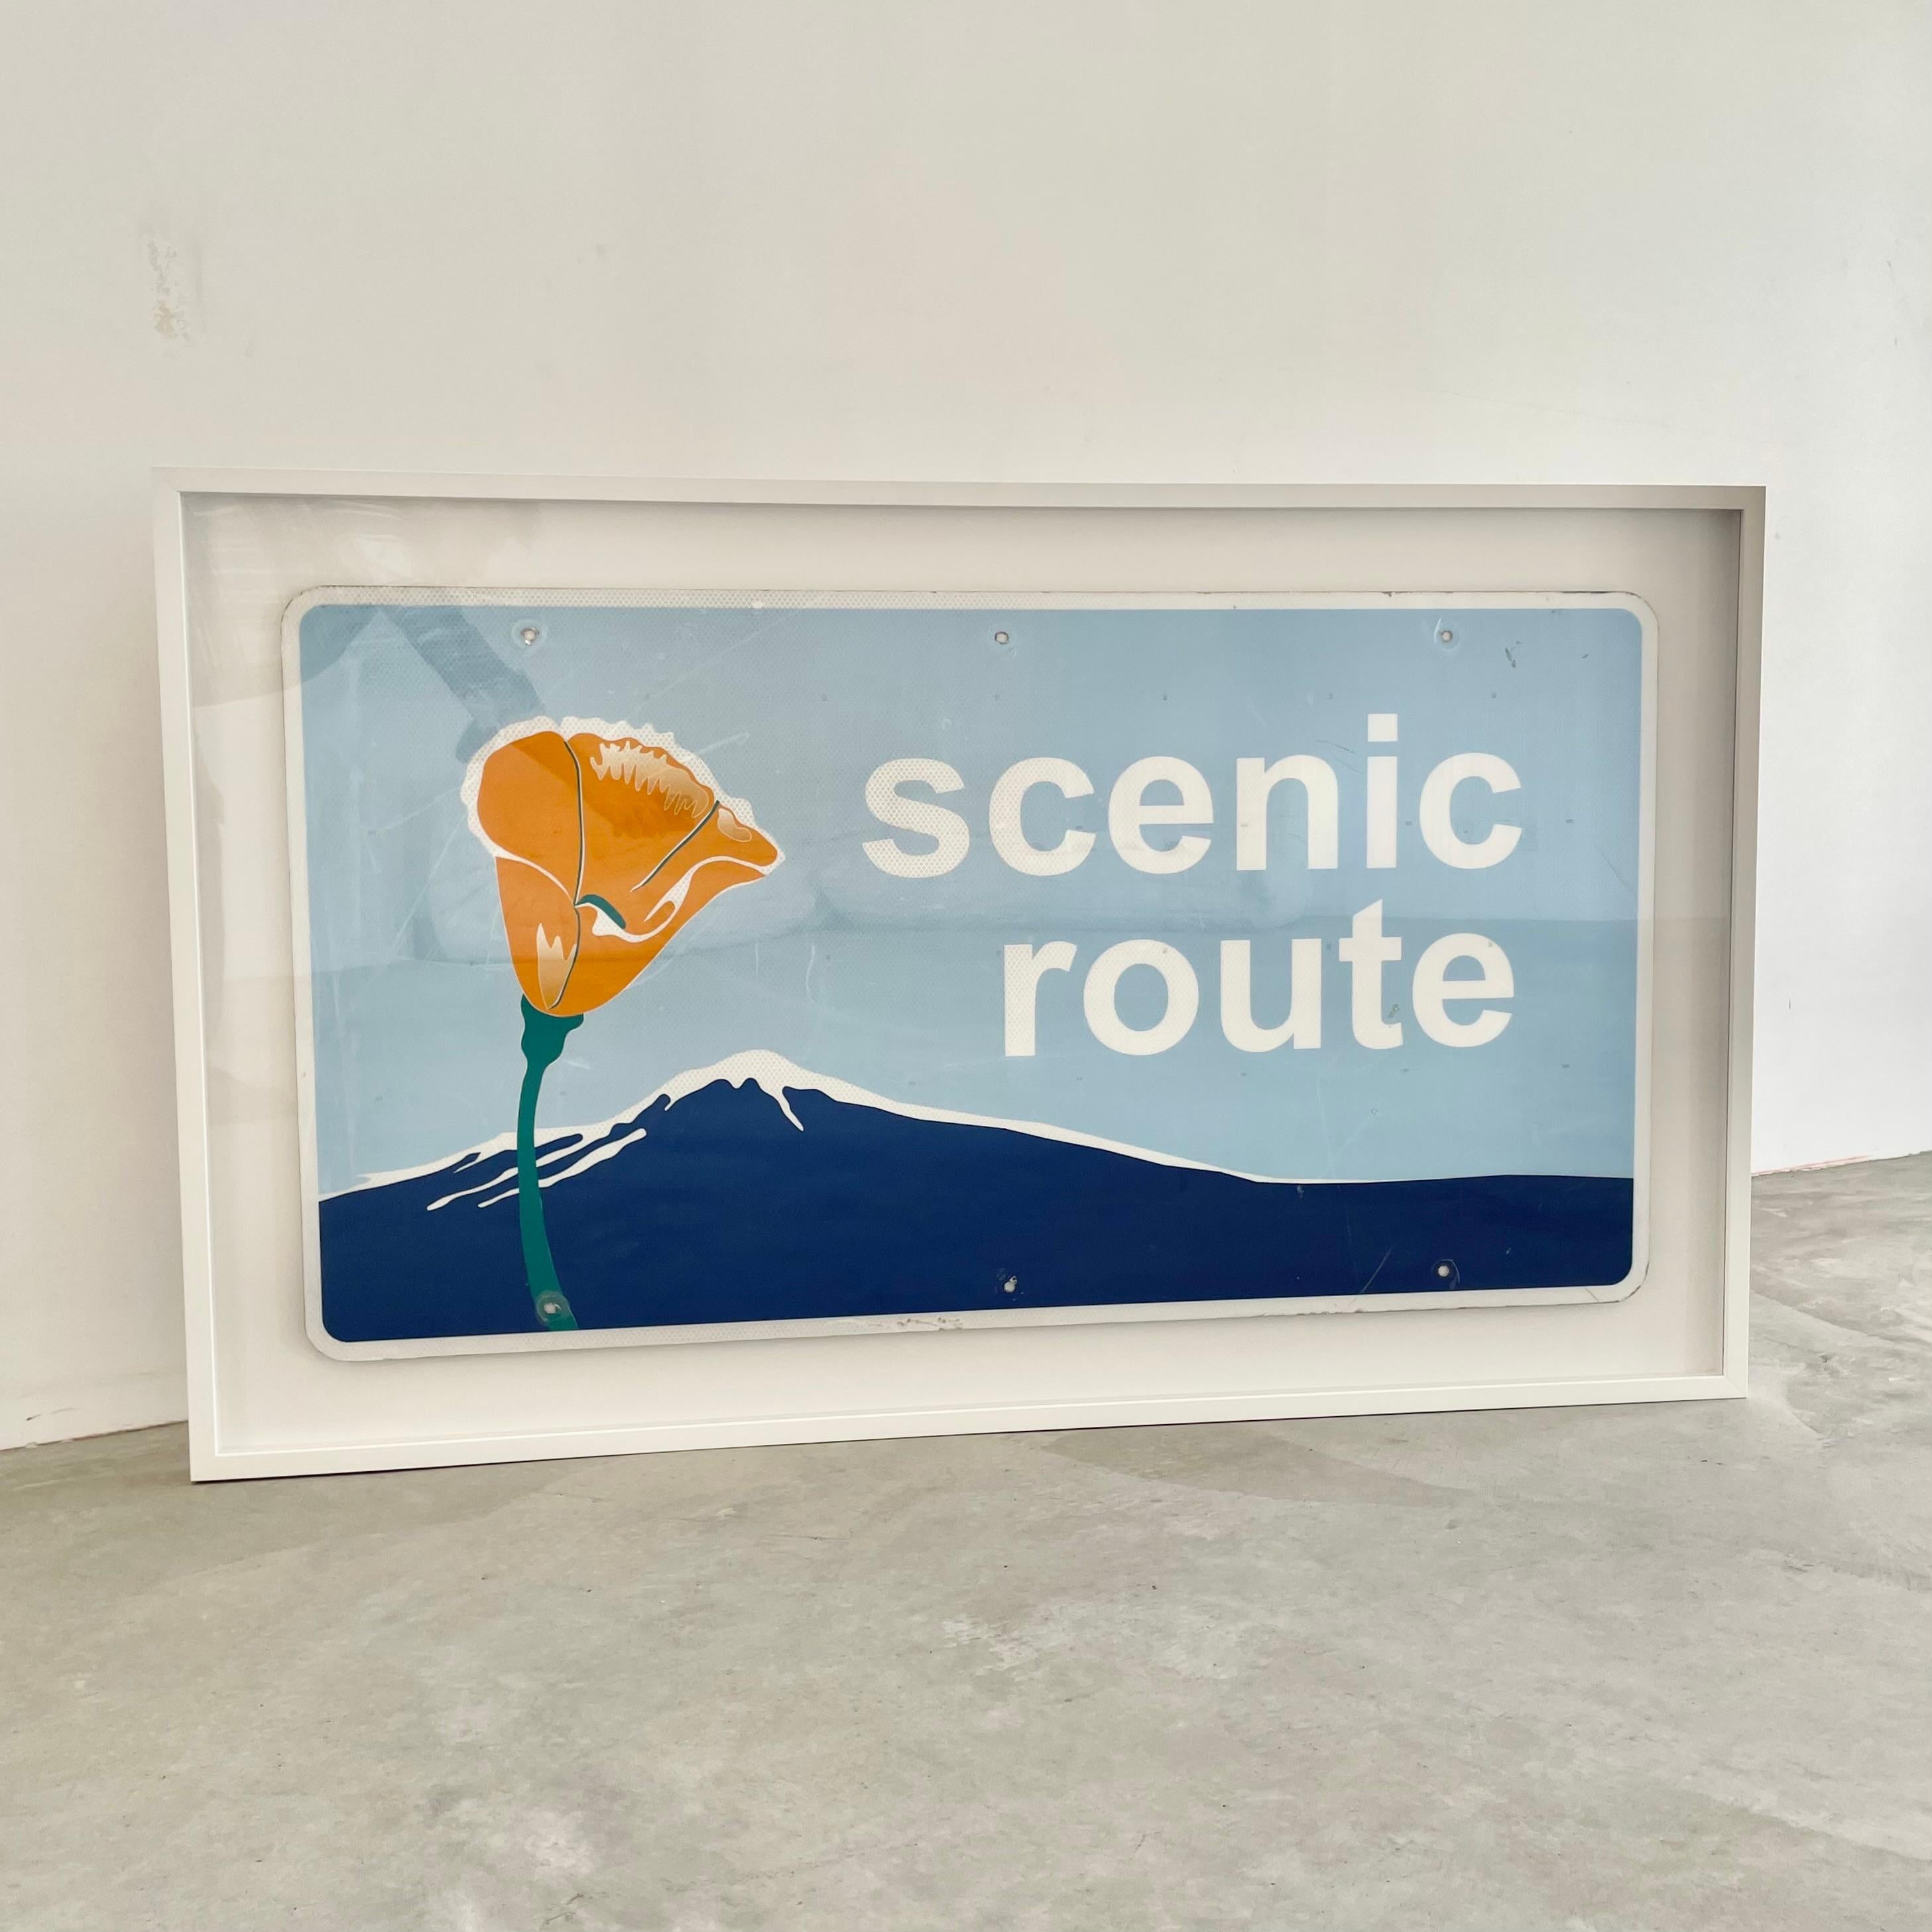 Very cool framed California freeway sign reading 